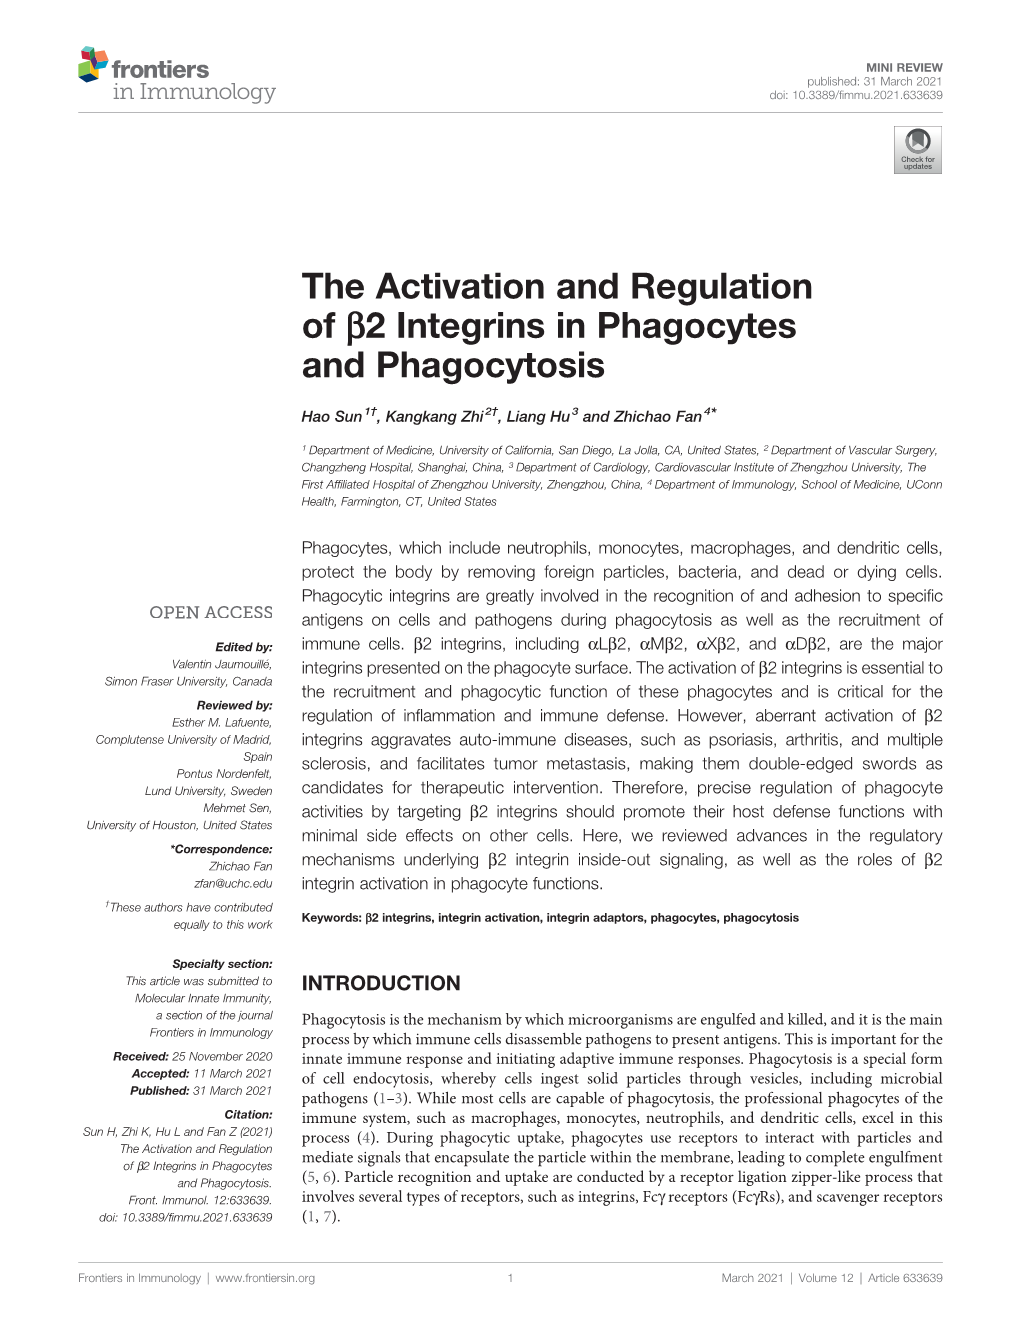 The Activation and Regulation of Β2 Integrins in Phagocytes And